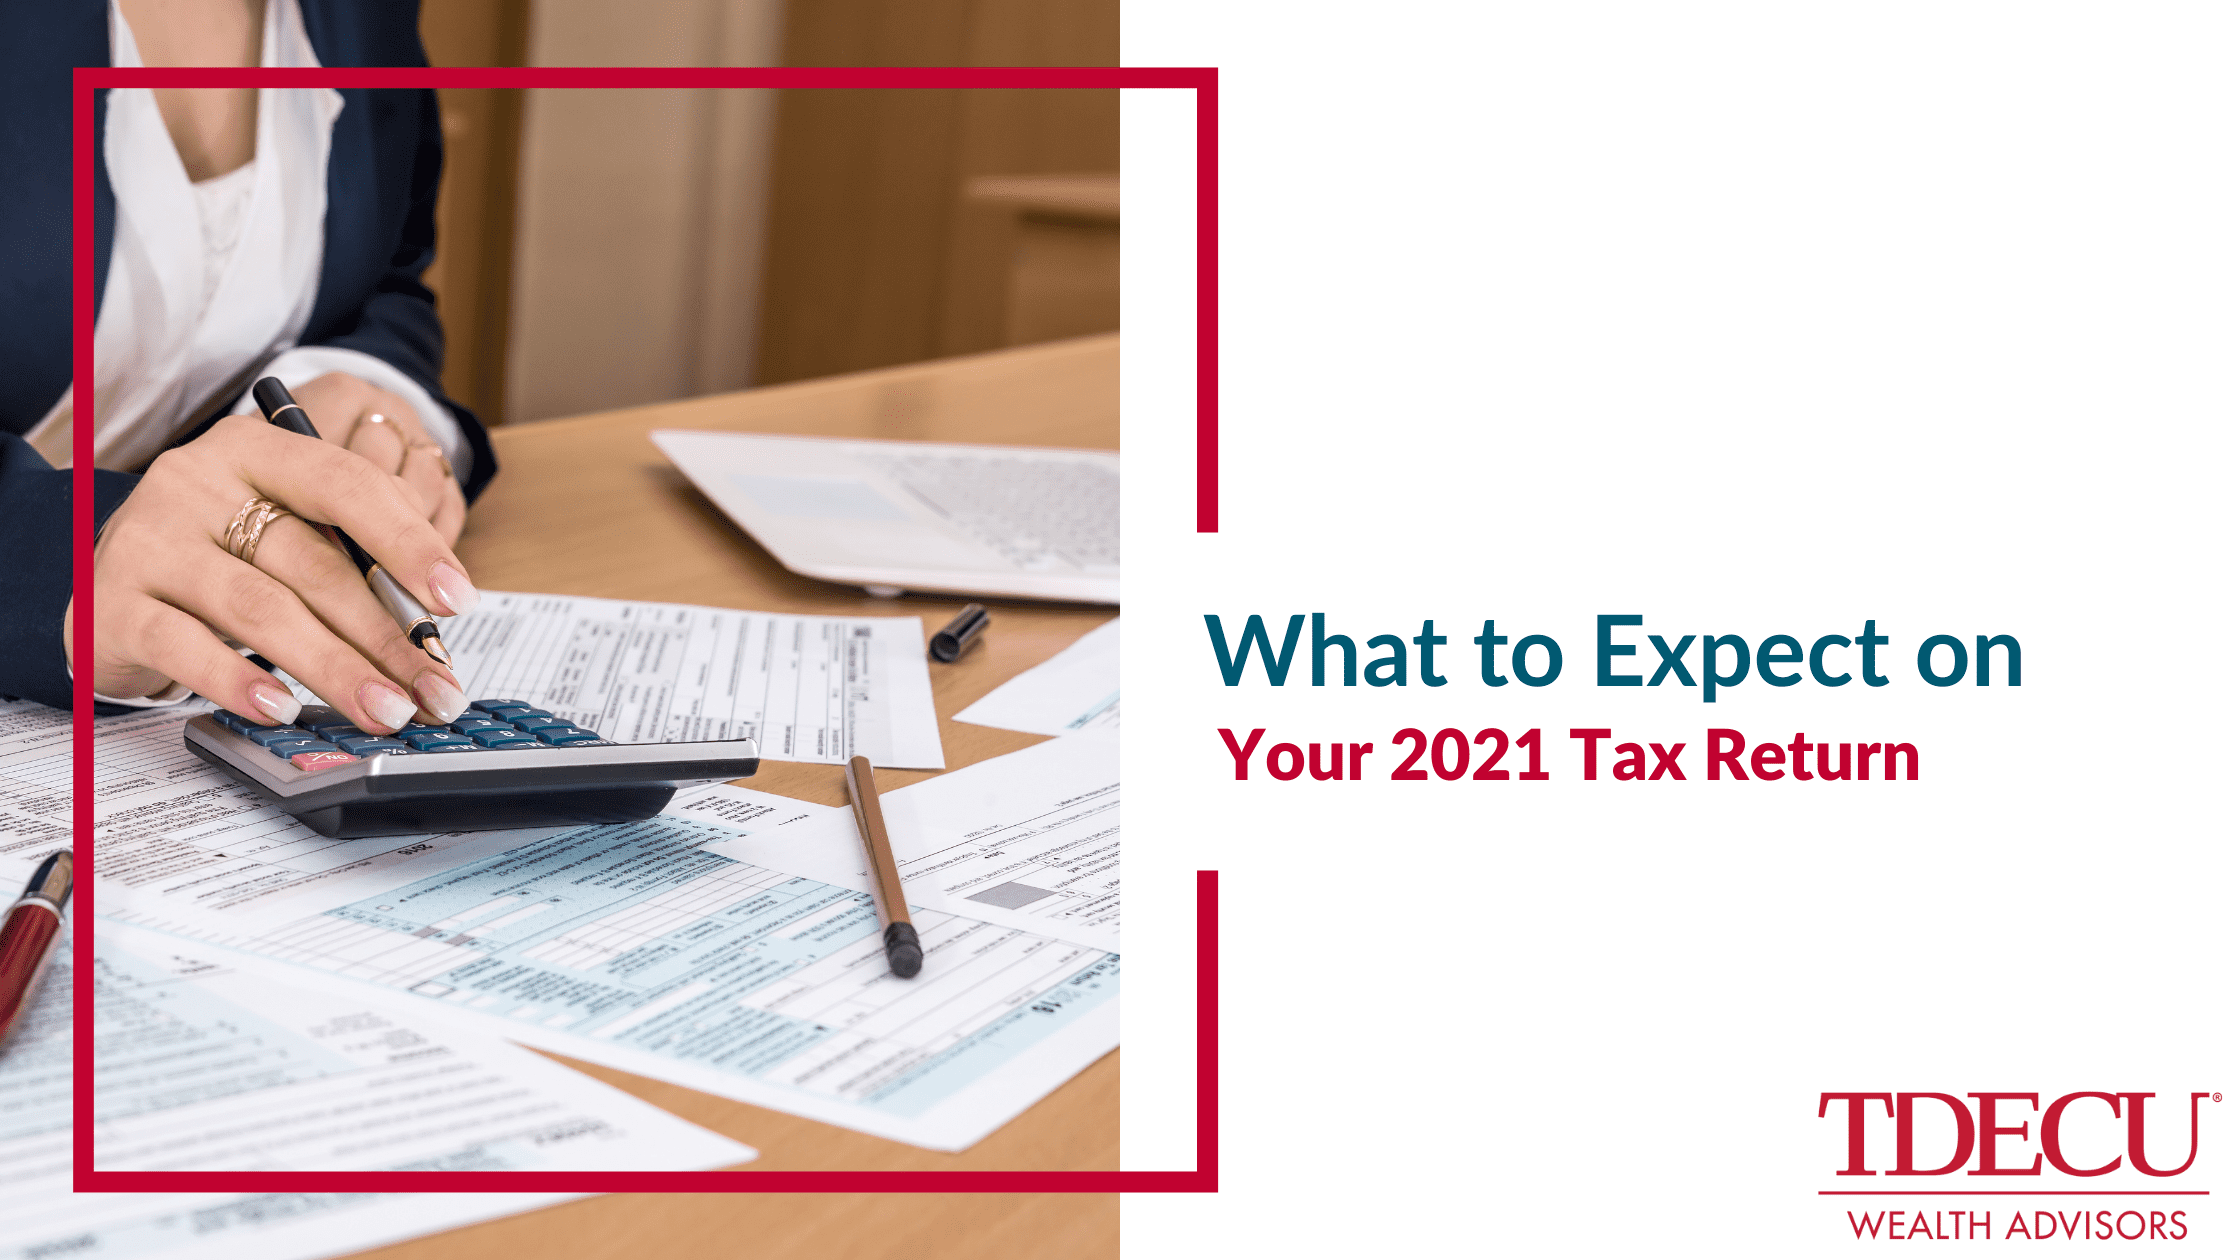 What to Expect on Your 2021 Tax Return